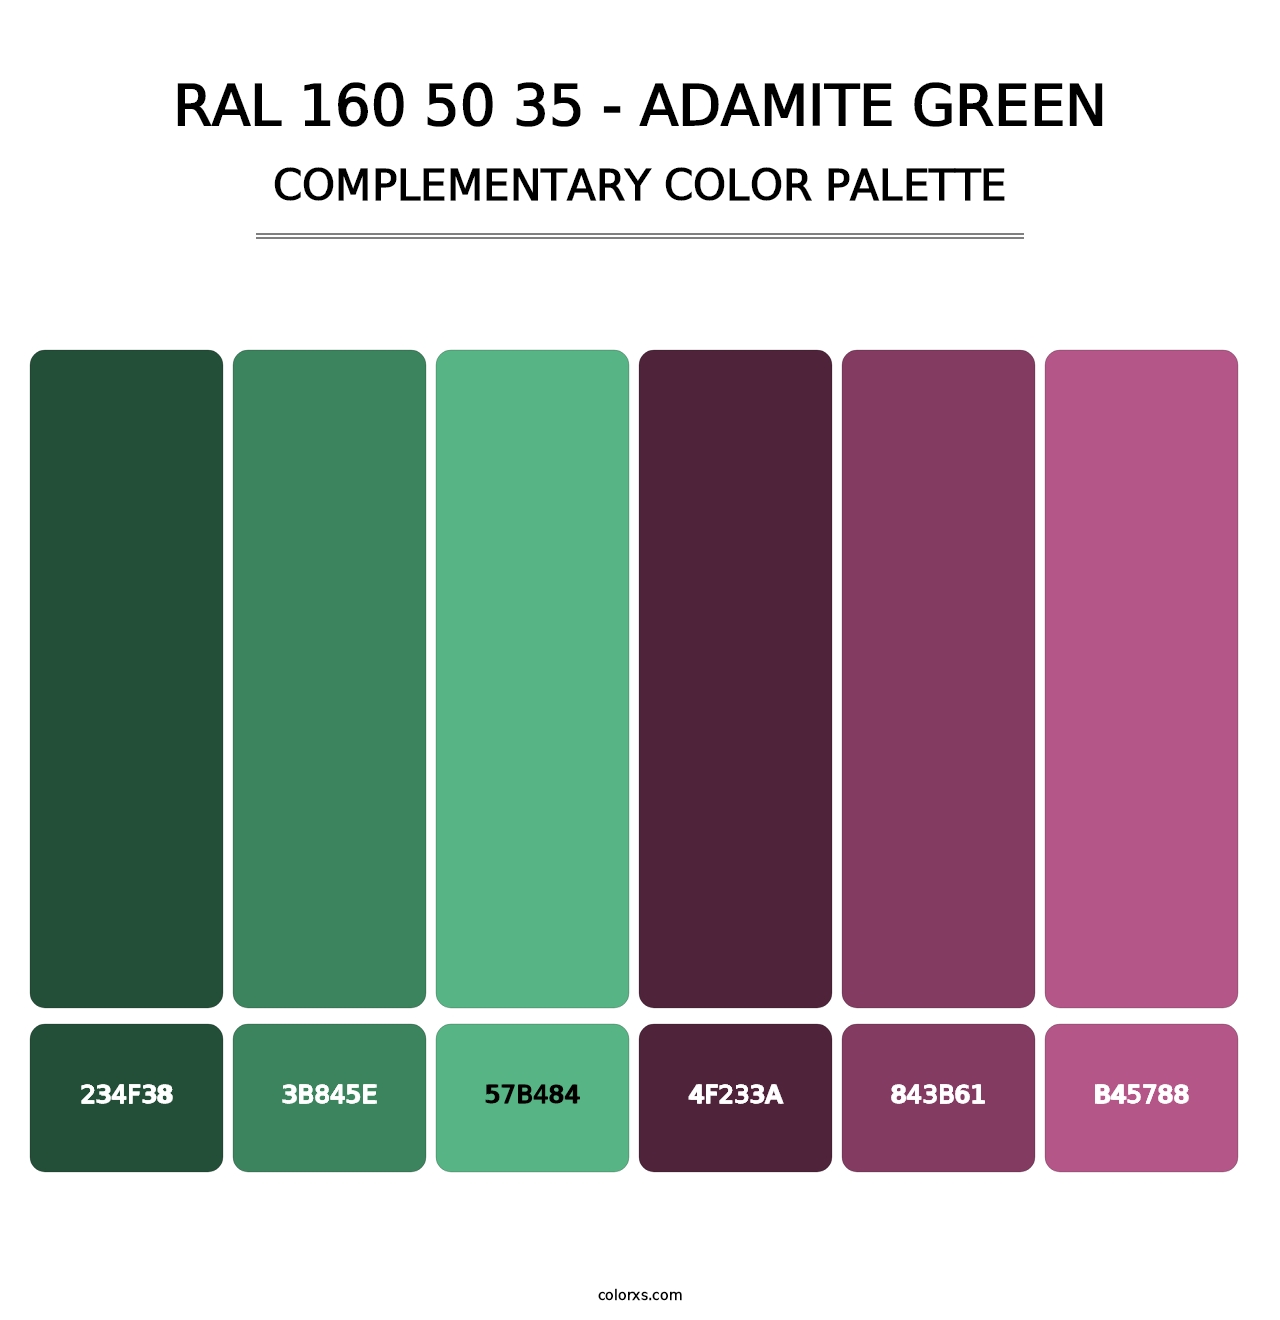 RAL 160 50 35 - Adamite Green - Complementary Color Palette